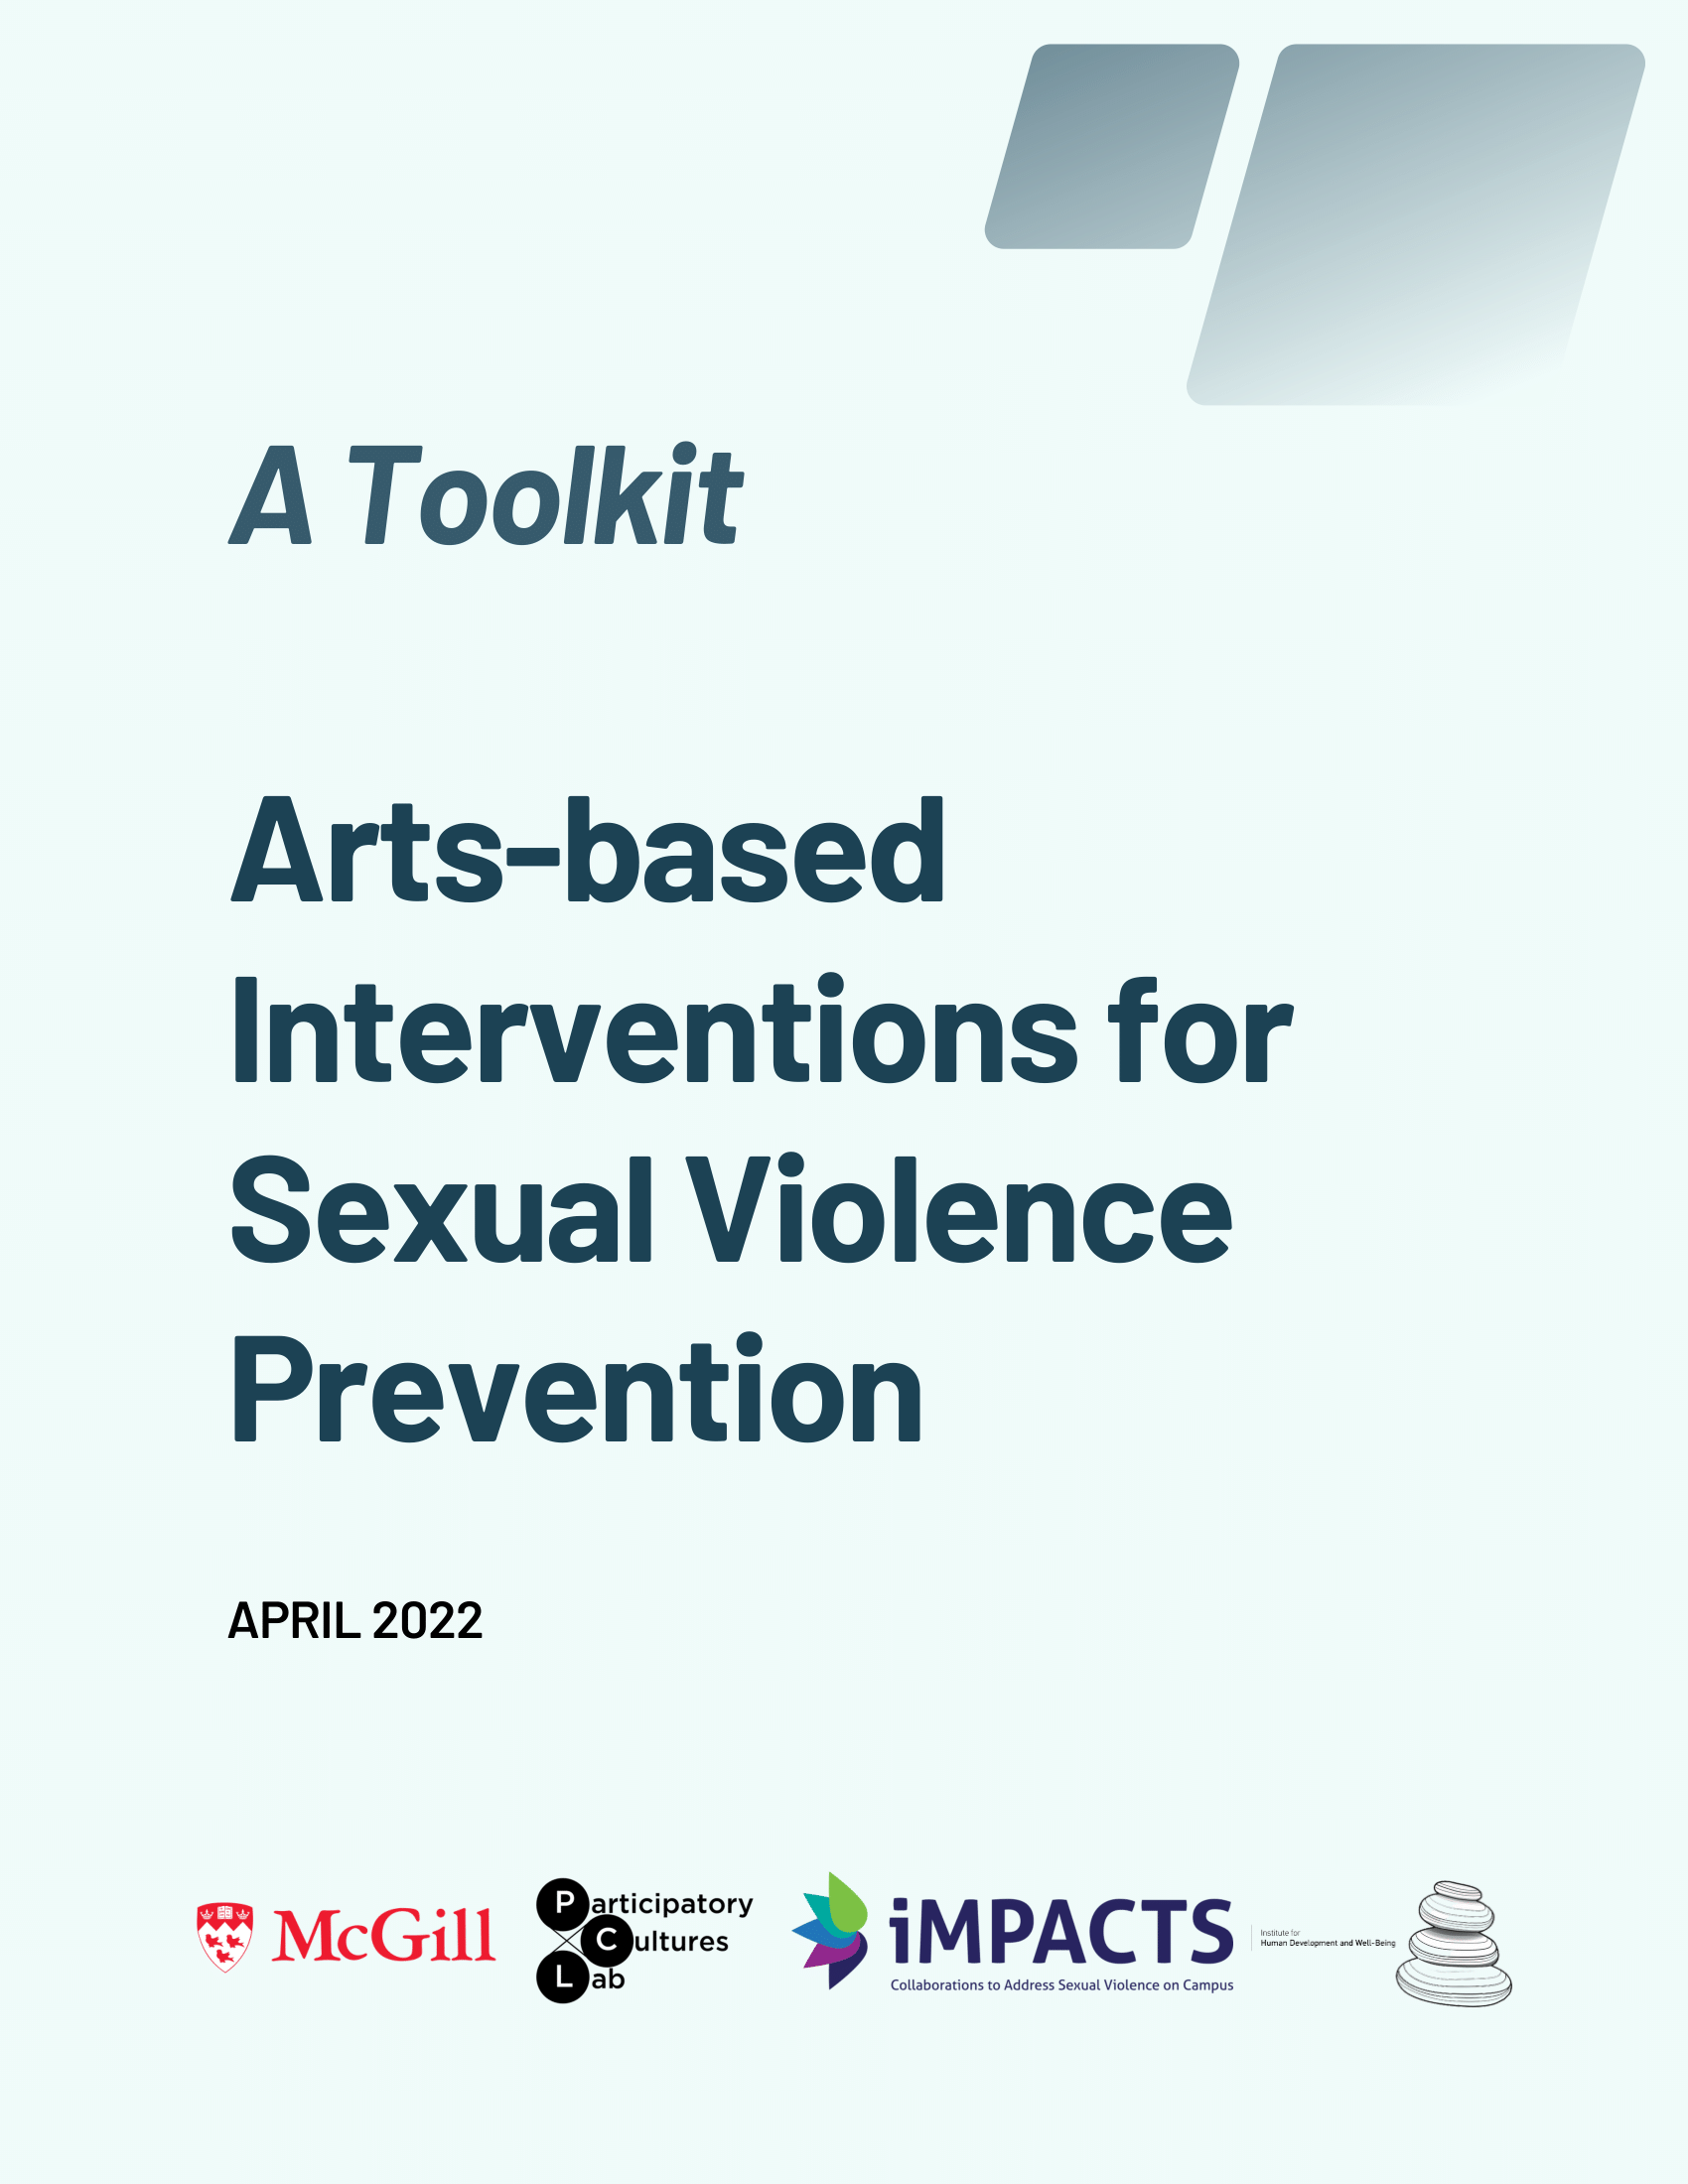 cover of the arts-based toolkit